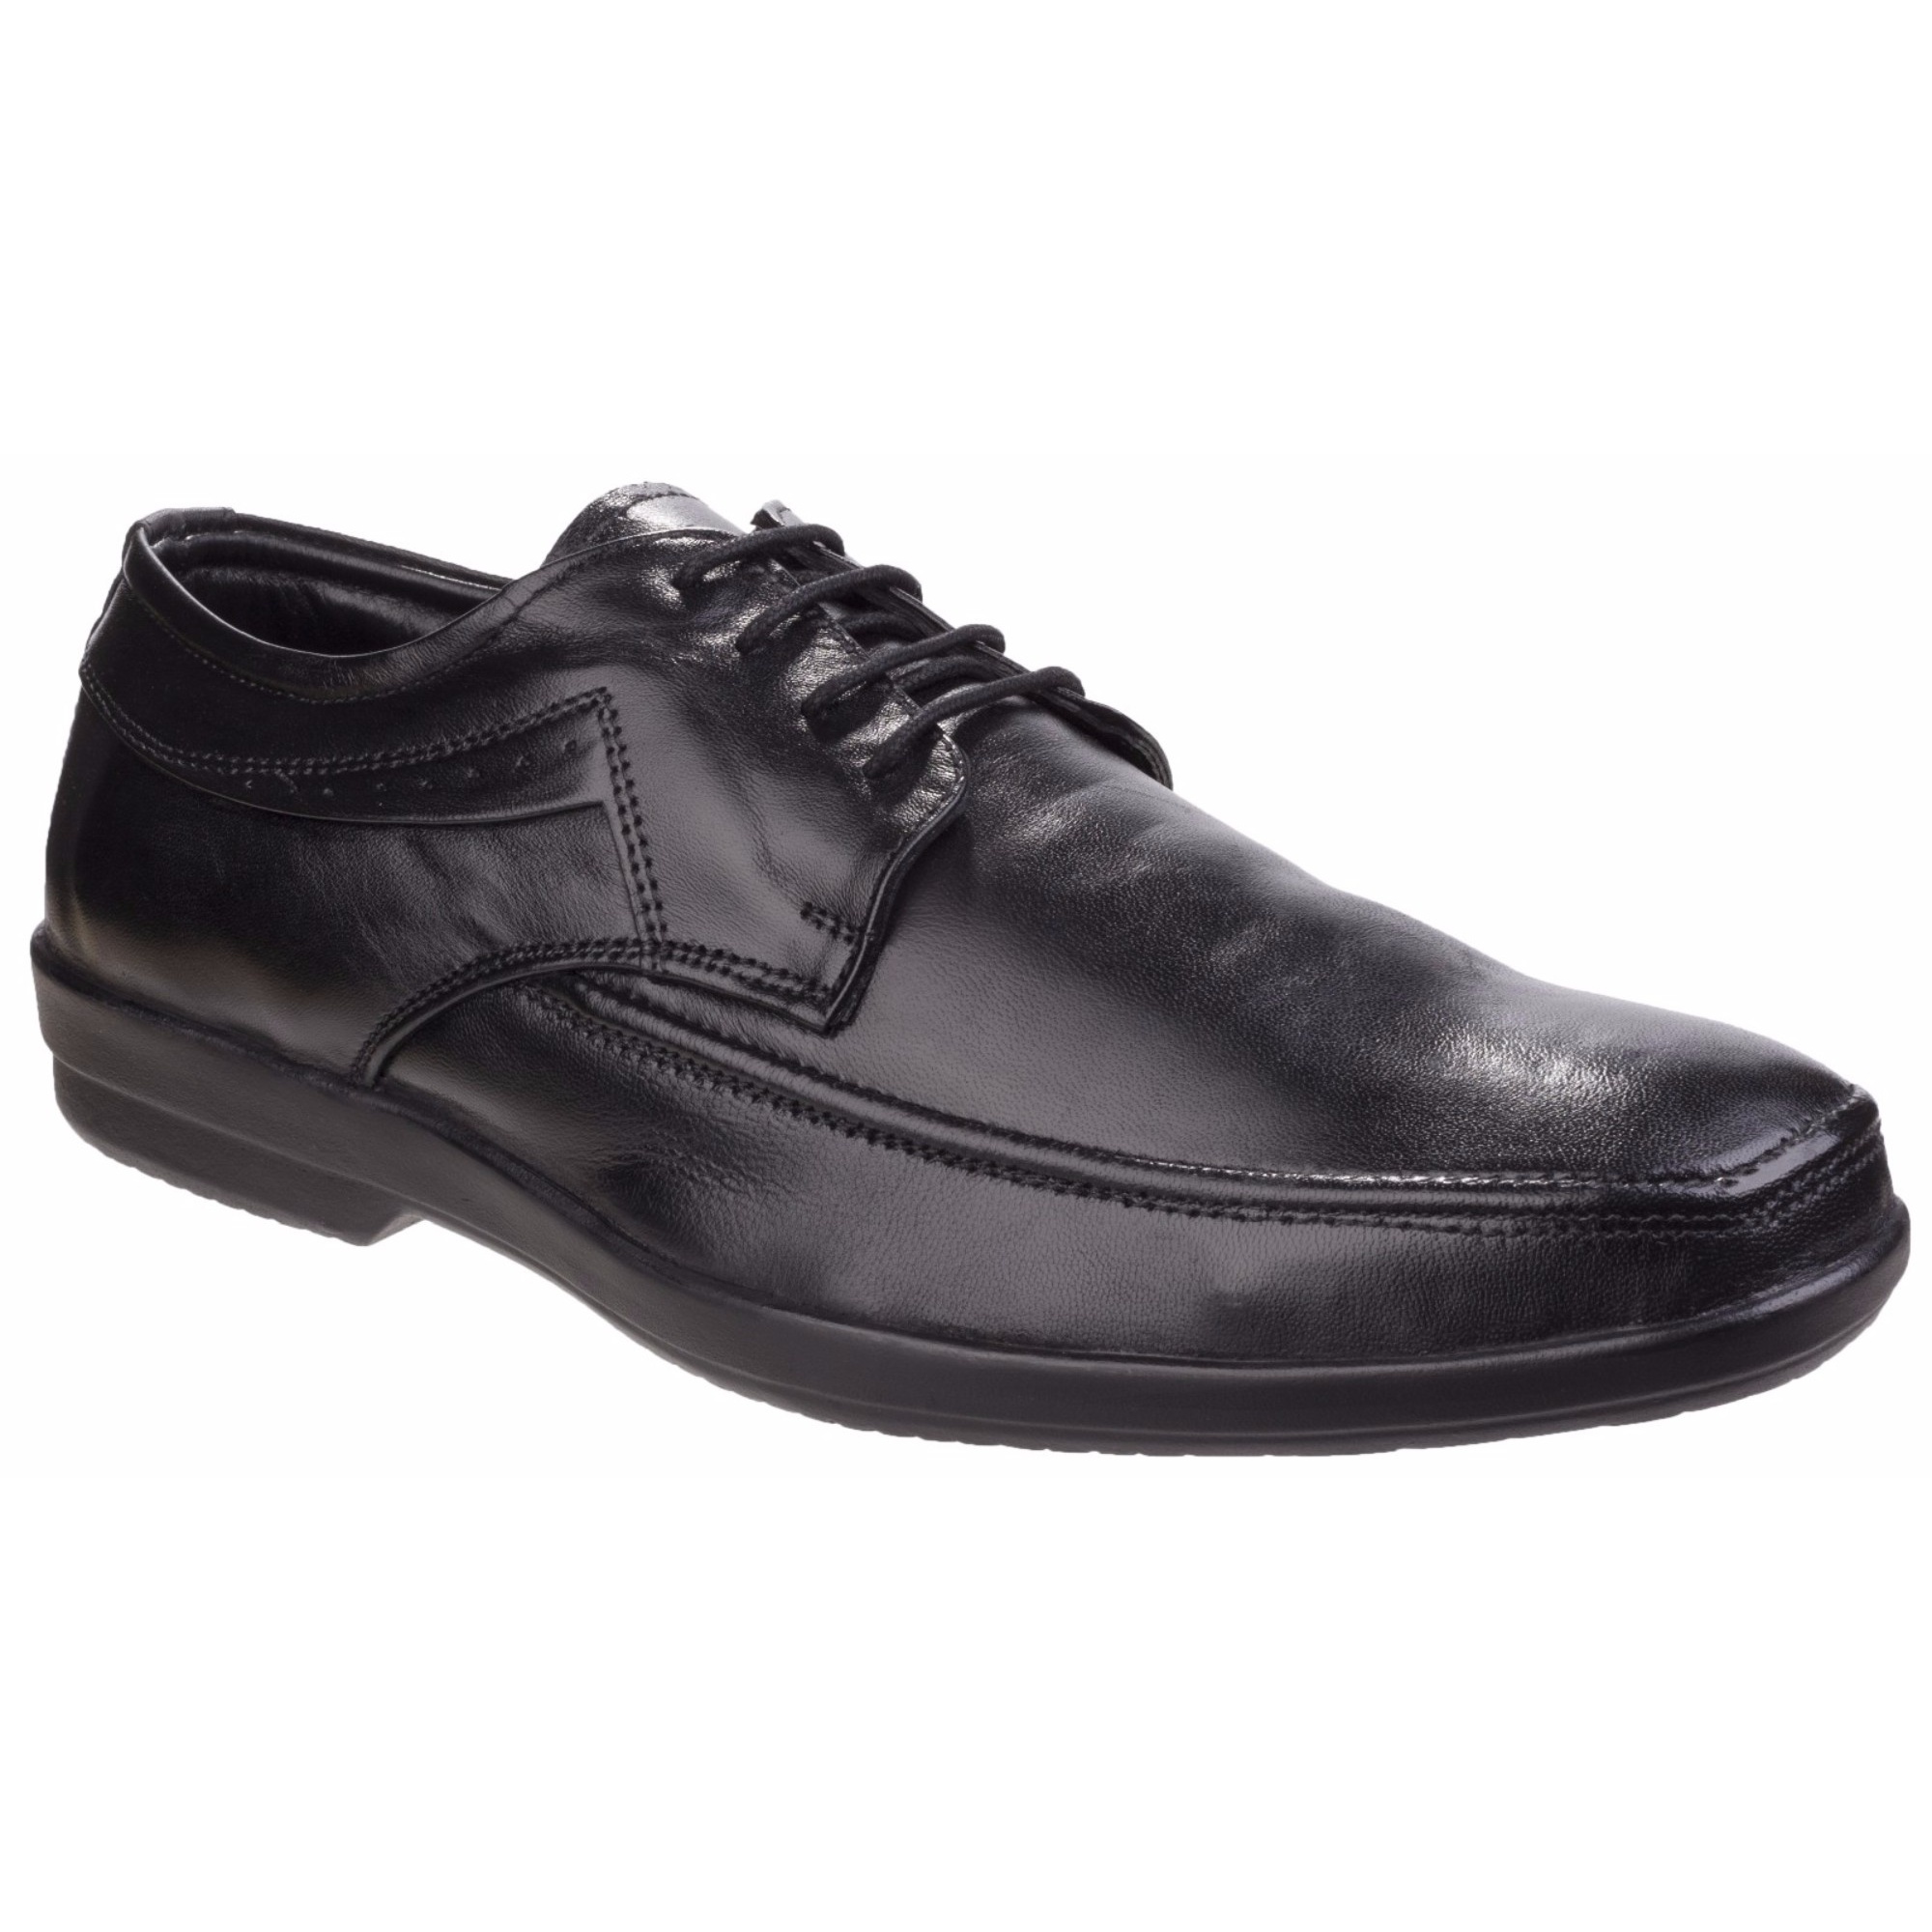 Fleet & Foster Mens Dave Apron Toe Oxford Formal Shoes - image 1 of 6